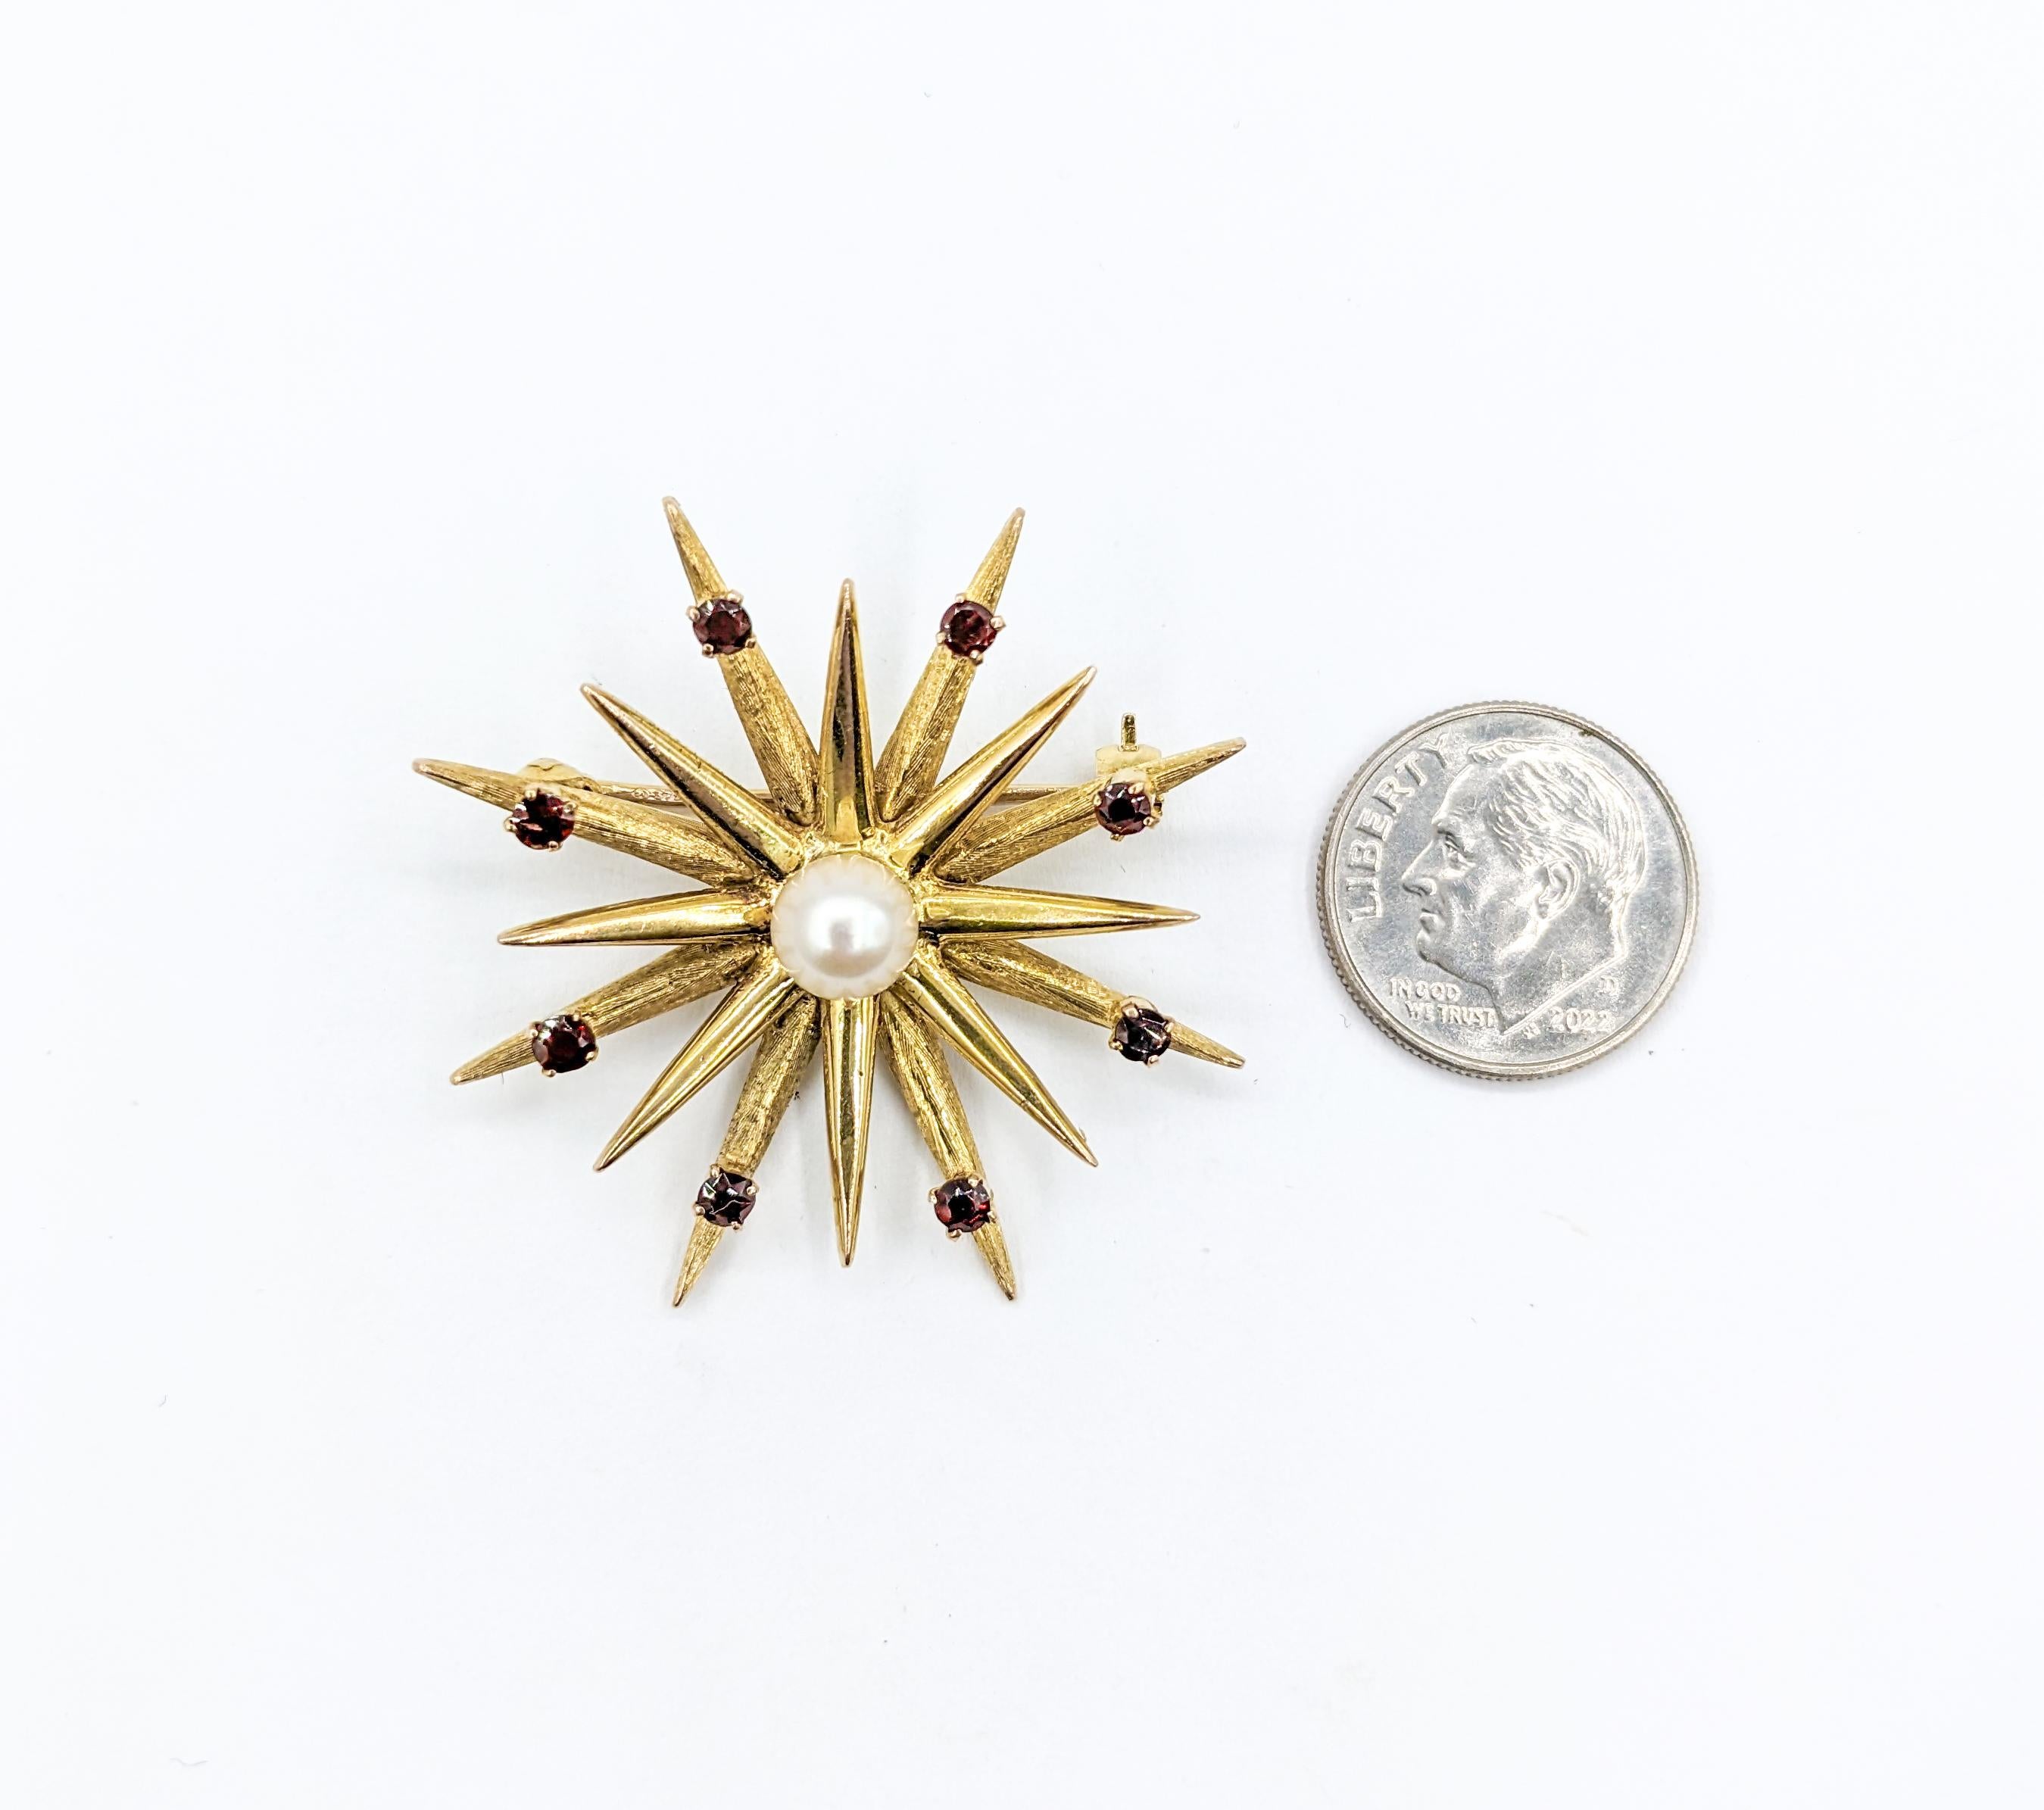 Antique 9kt Macedonian Star, Akoya & Garnet Pin Brooch

This star symbol with sixteen rays is the national Macedonian royal symbol of Phillip of Macedon, Alexander the Great, and the ancient Macedonian Empire. It is also known as the Macedonian